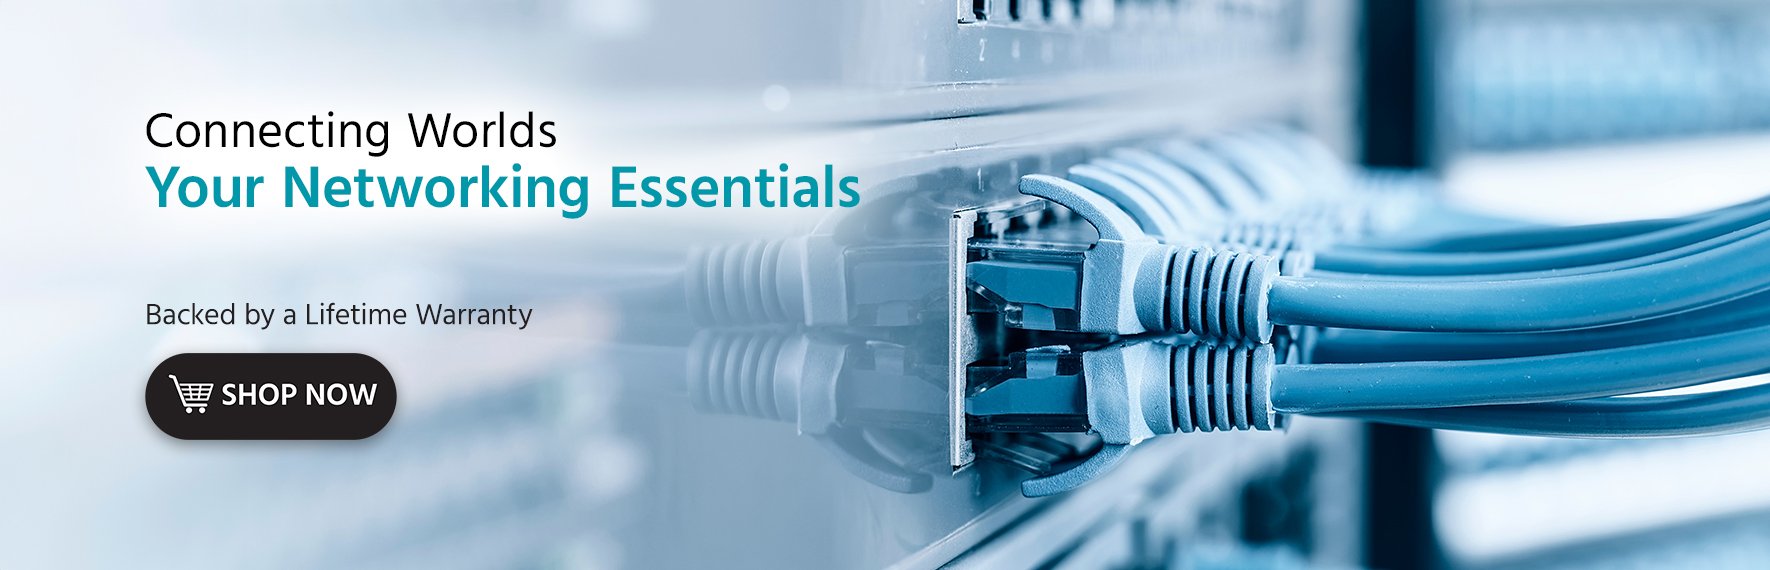 Connecting Worlds: Your Networking Essentials Shop Now